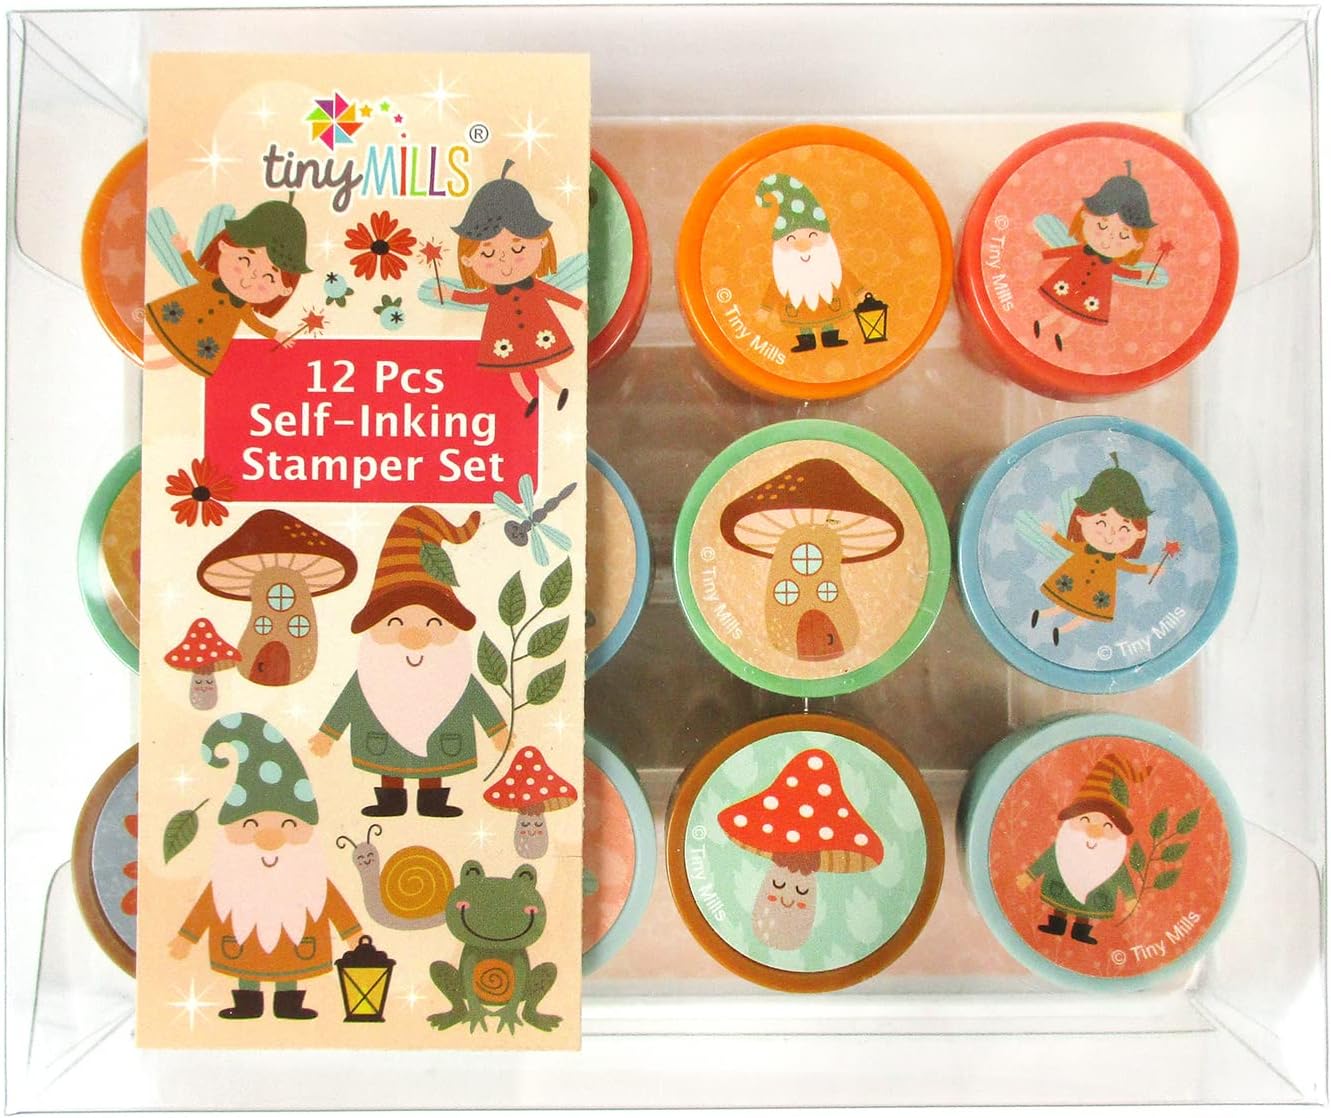 TINYMILLS 12 Pcs Garden Fairies Mushroom Gnomes Stamp Kit for Kids - Gnomes Garden Fairies Tea Party Self Inking Stamps Gift Party Favors